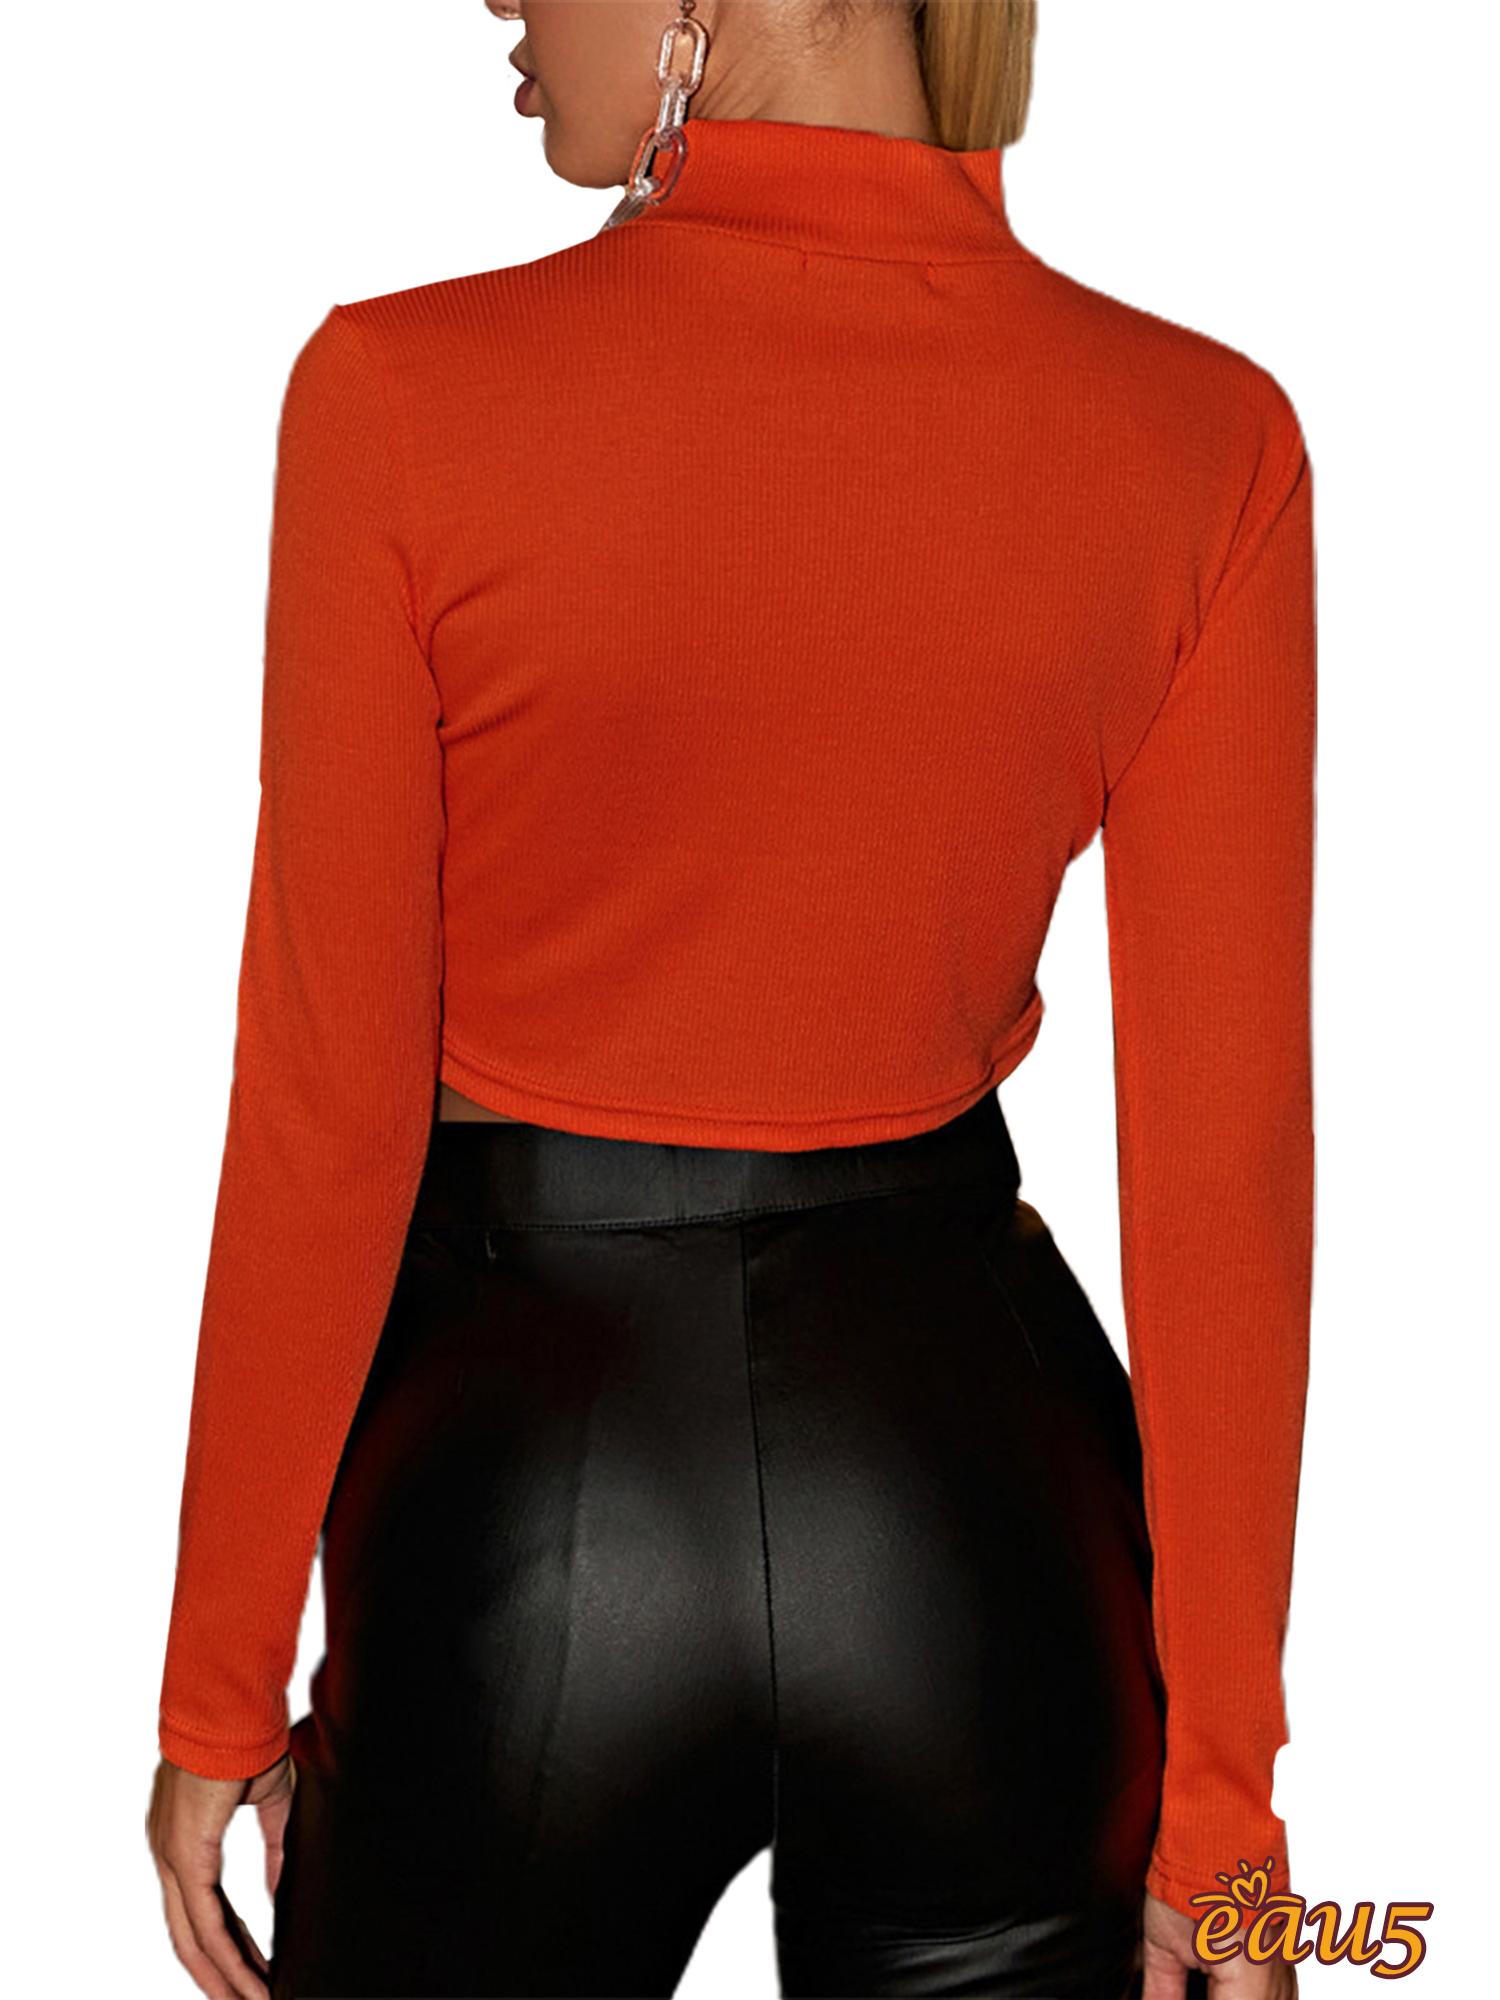 ☜♠☞Women´s Rib Knit Crop Top Long Sleeve Stand Collar Zipper Front Slim Fit Solid Color Basic Tee Shirt